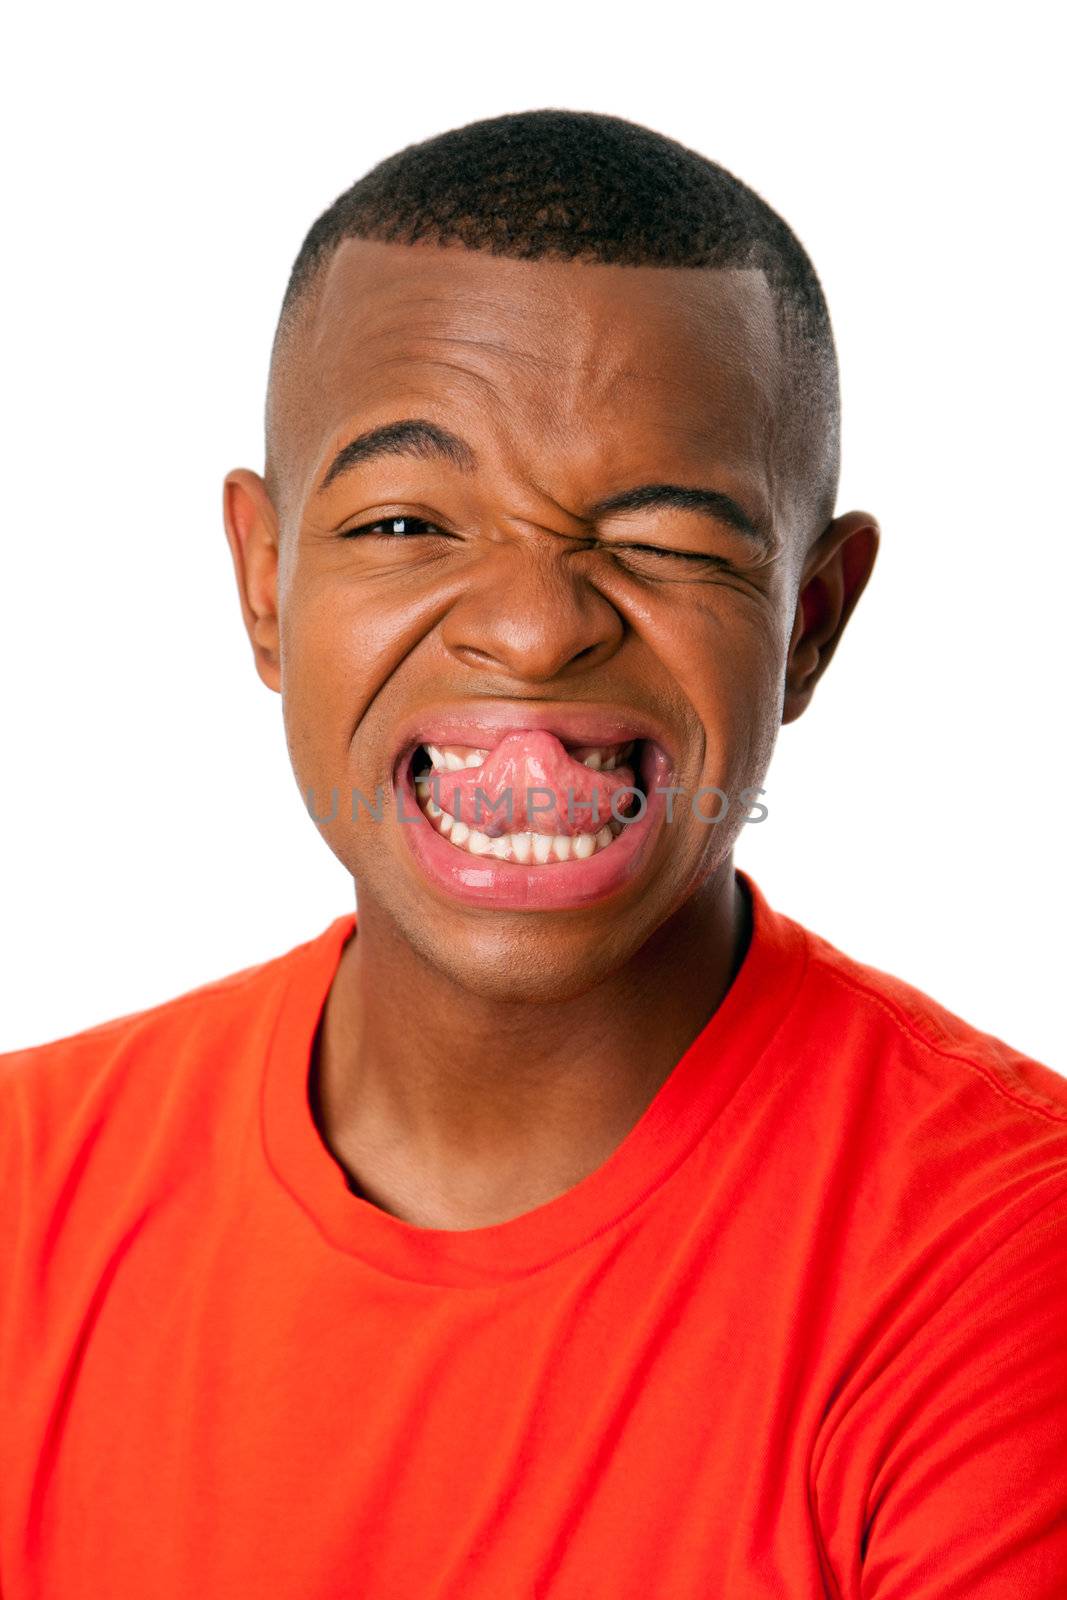 Young man with humorous funny expression sticking tongue out face, isolated.